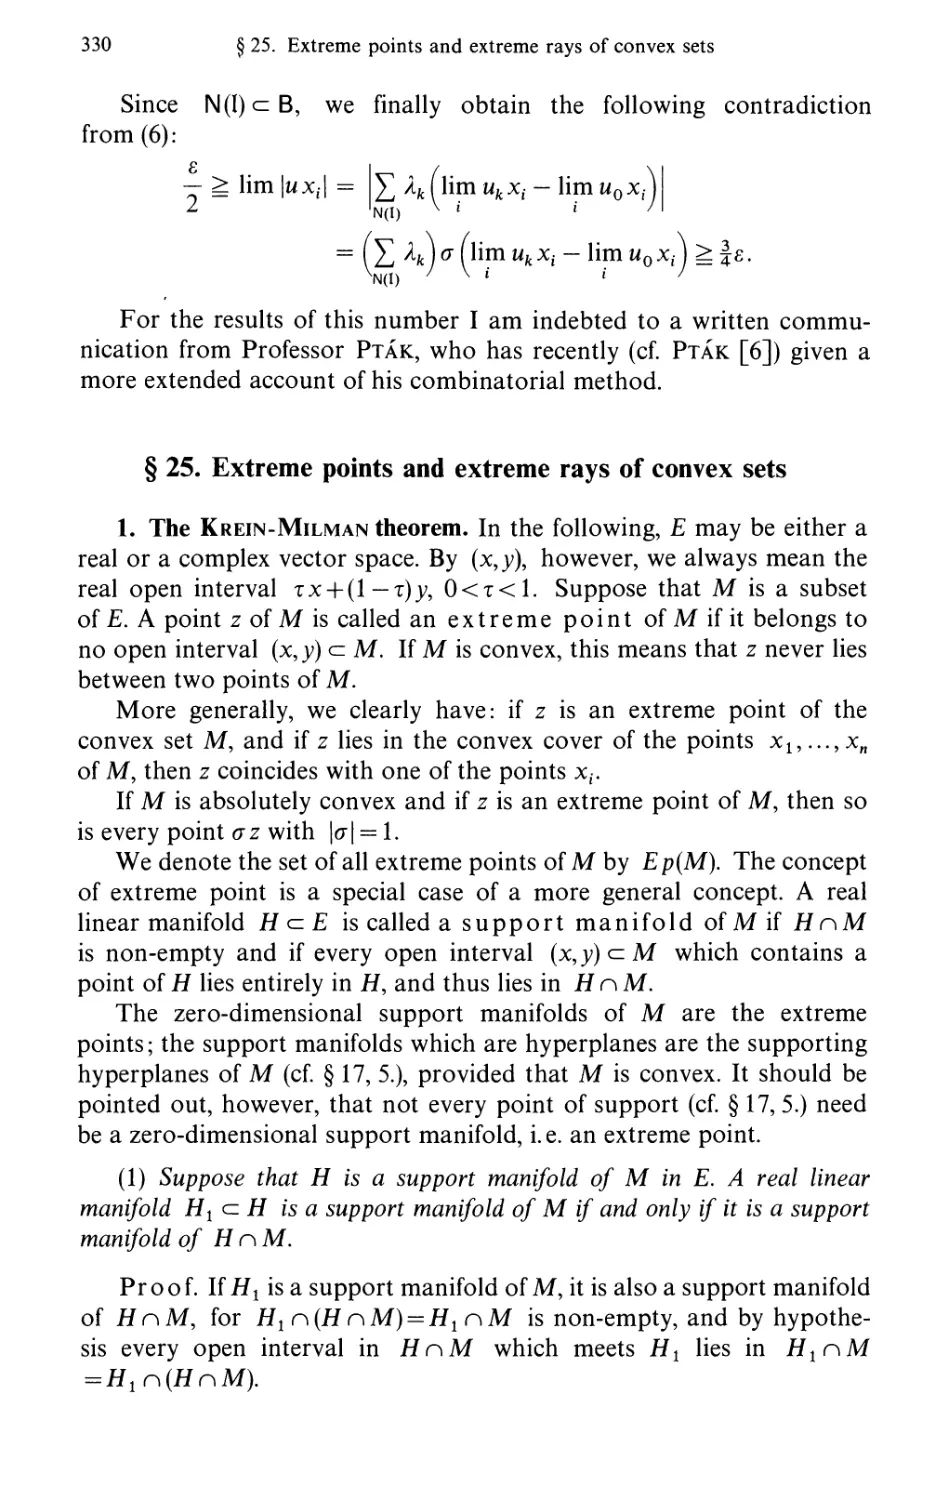 §25. Extreme points and extreme rays of convex sets